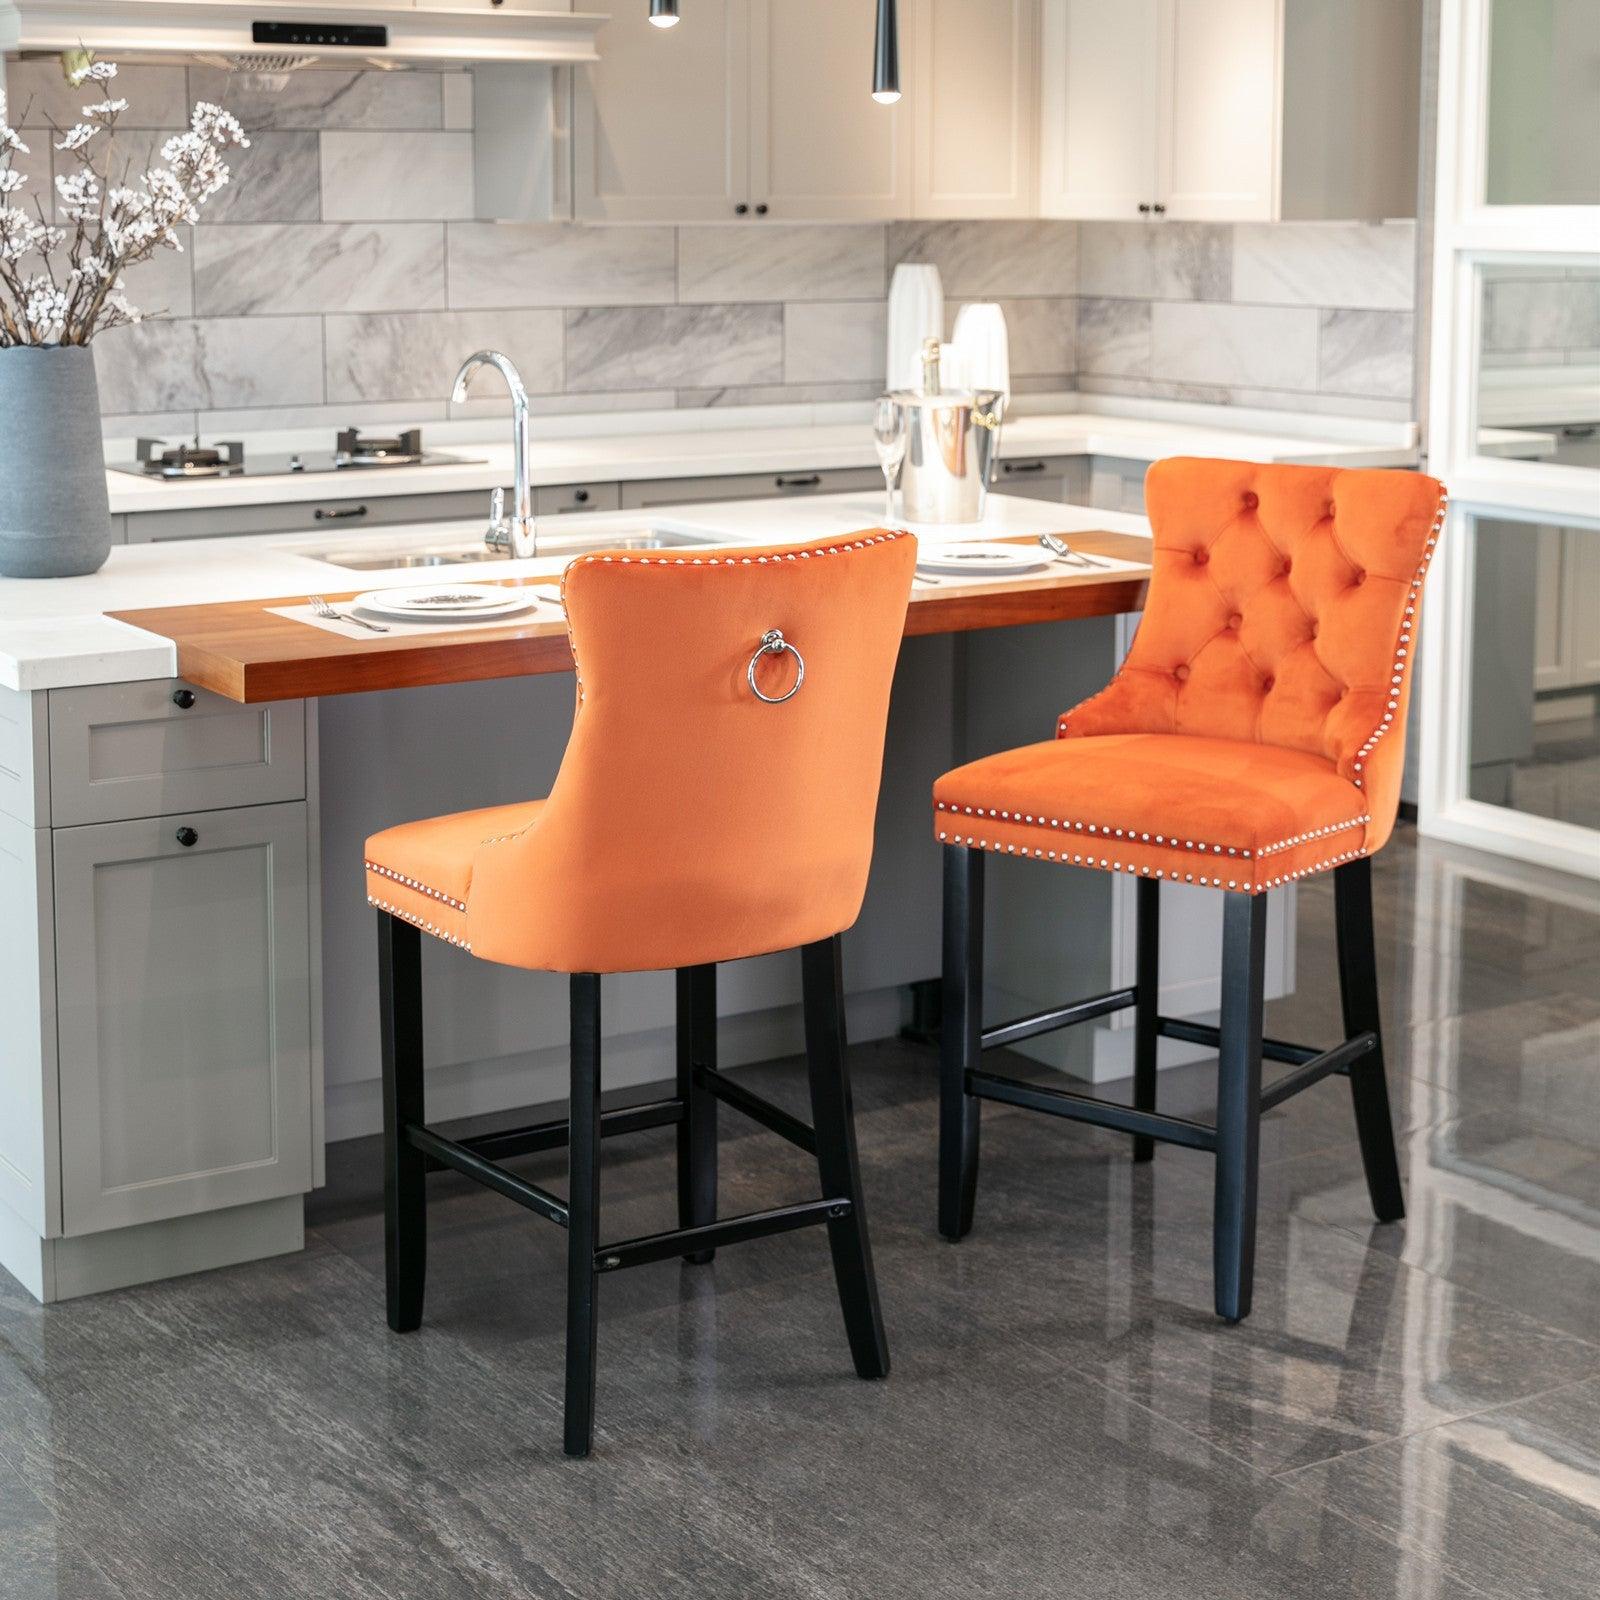 Contemporary Velvet Upholstered Barstools with Button Tufted Decoration and Wooden Legs, and Chrome Nailhead Trim, Leisure Style Bar Chairs, Bar stools, Set of 2 (Orange) LamCham